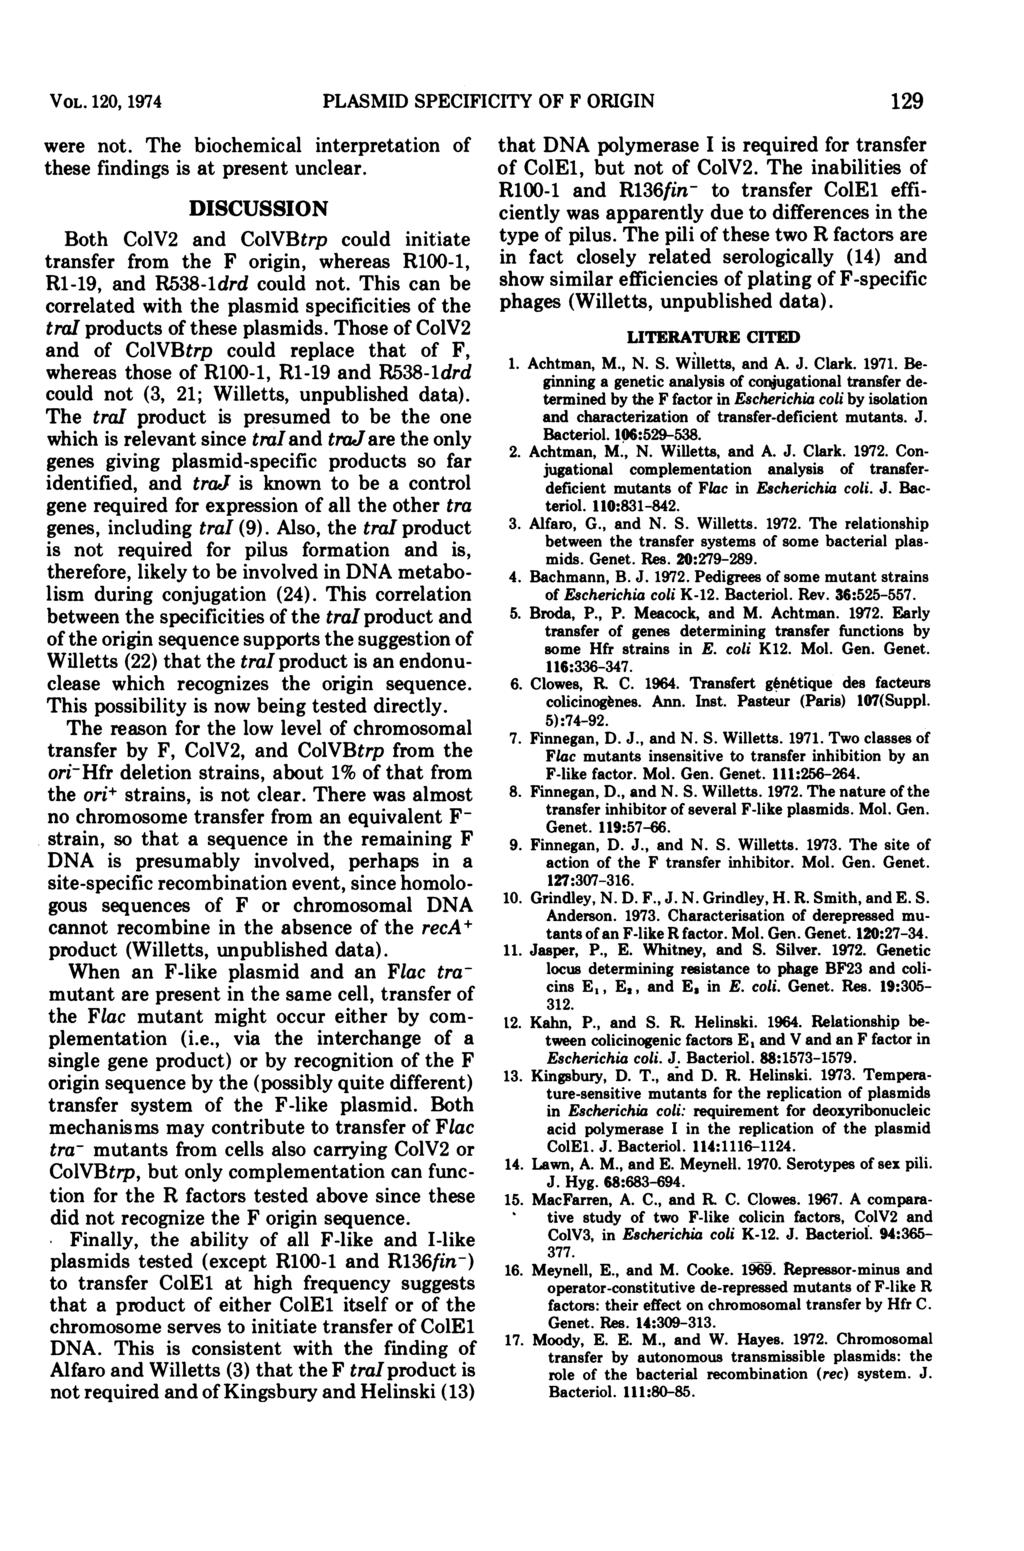 VOL. 120, 1974 were not. The biochemical interpretation of these findings is at present unclear.